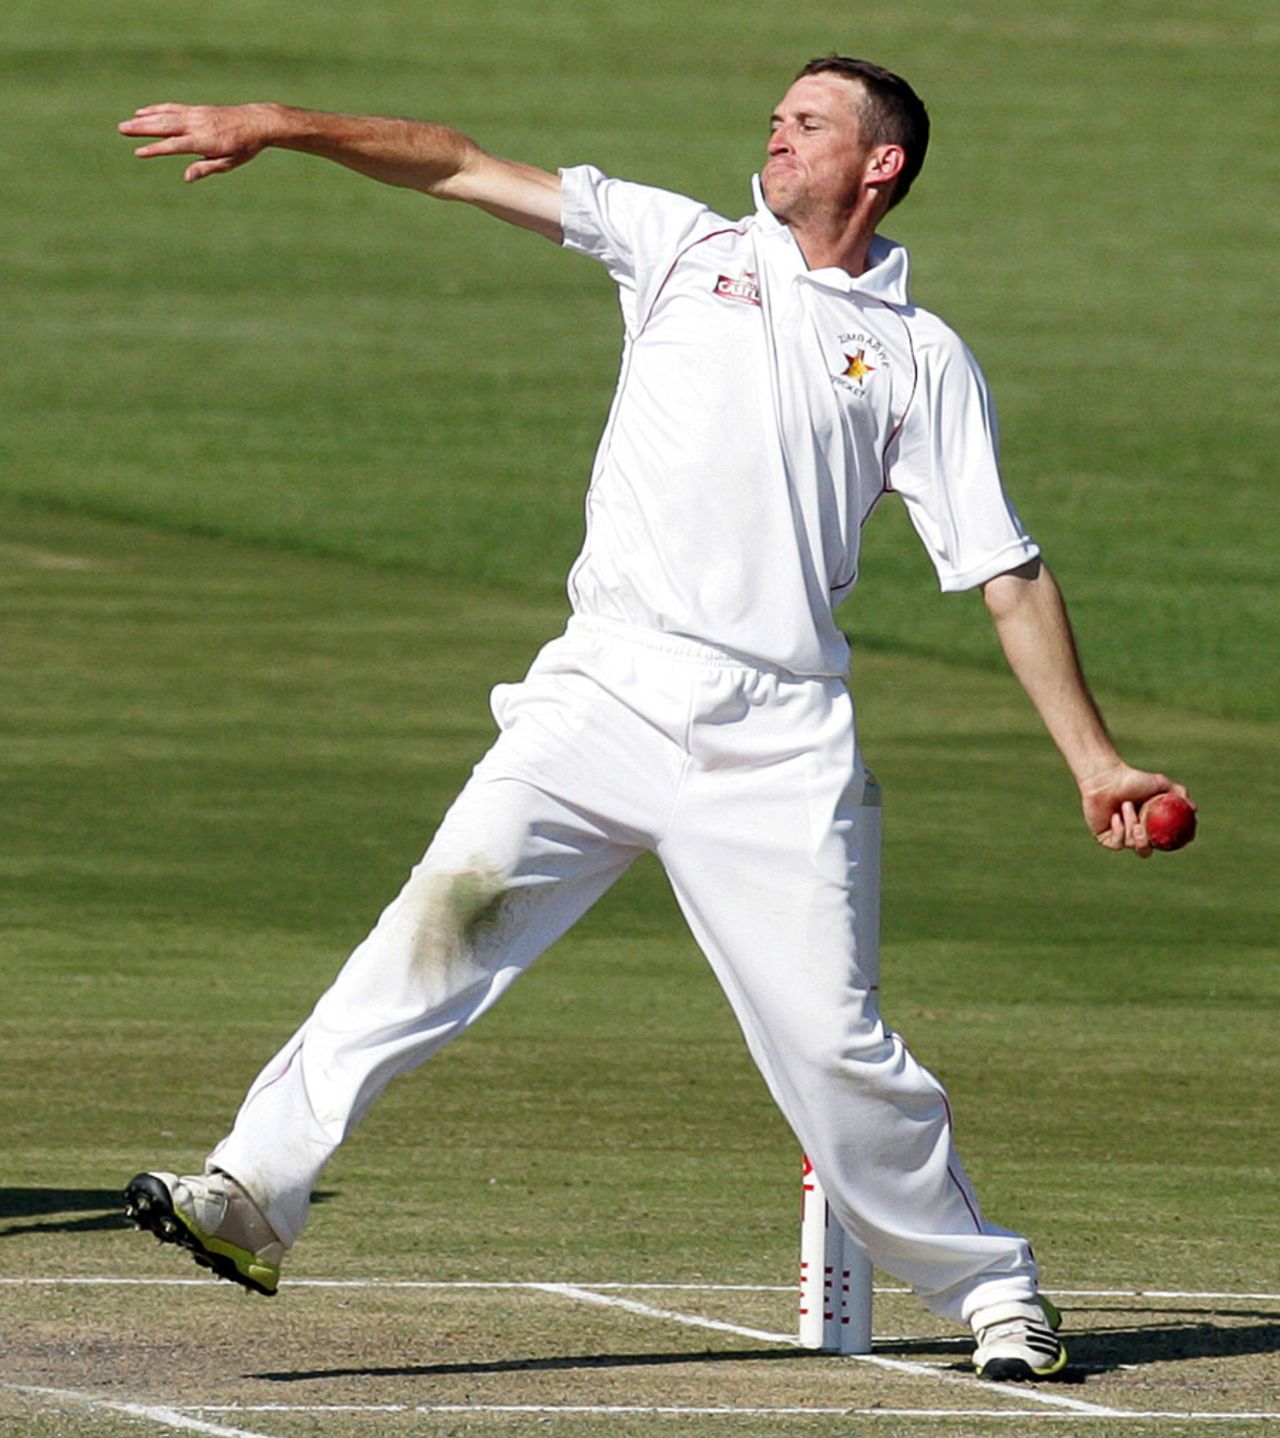 Sean Williams at his delivery stride, Zimbabwe v South Africa, only Test, Harare, 2nd day, August 10, 2014